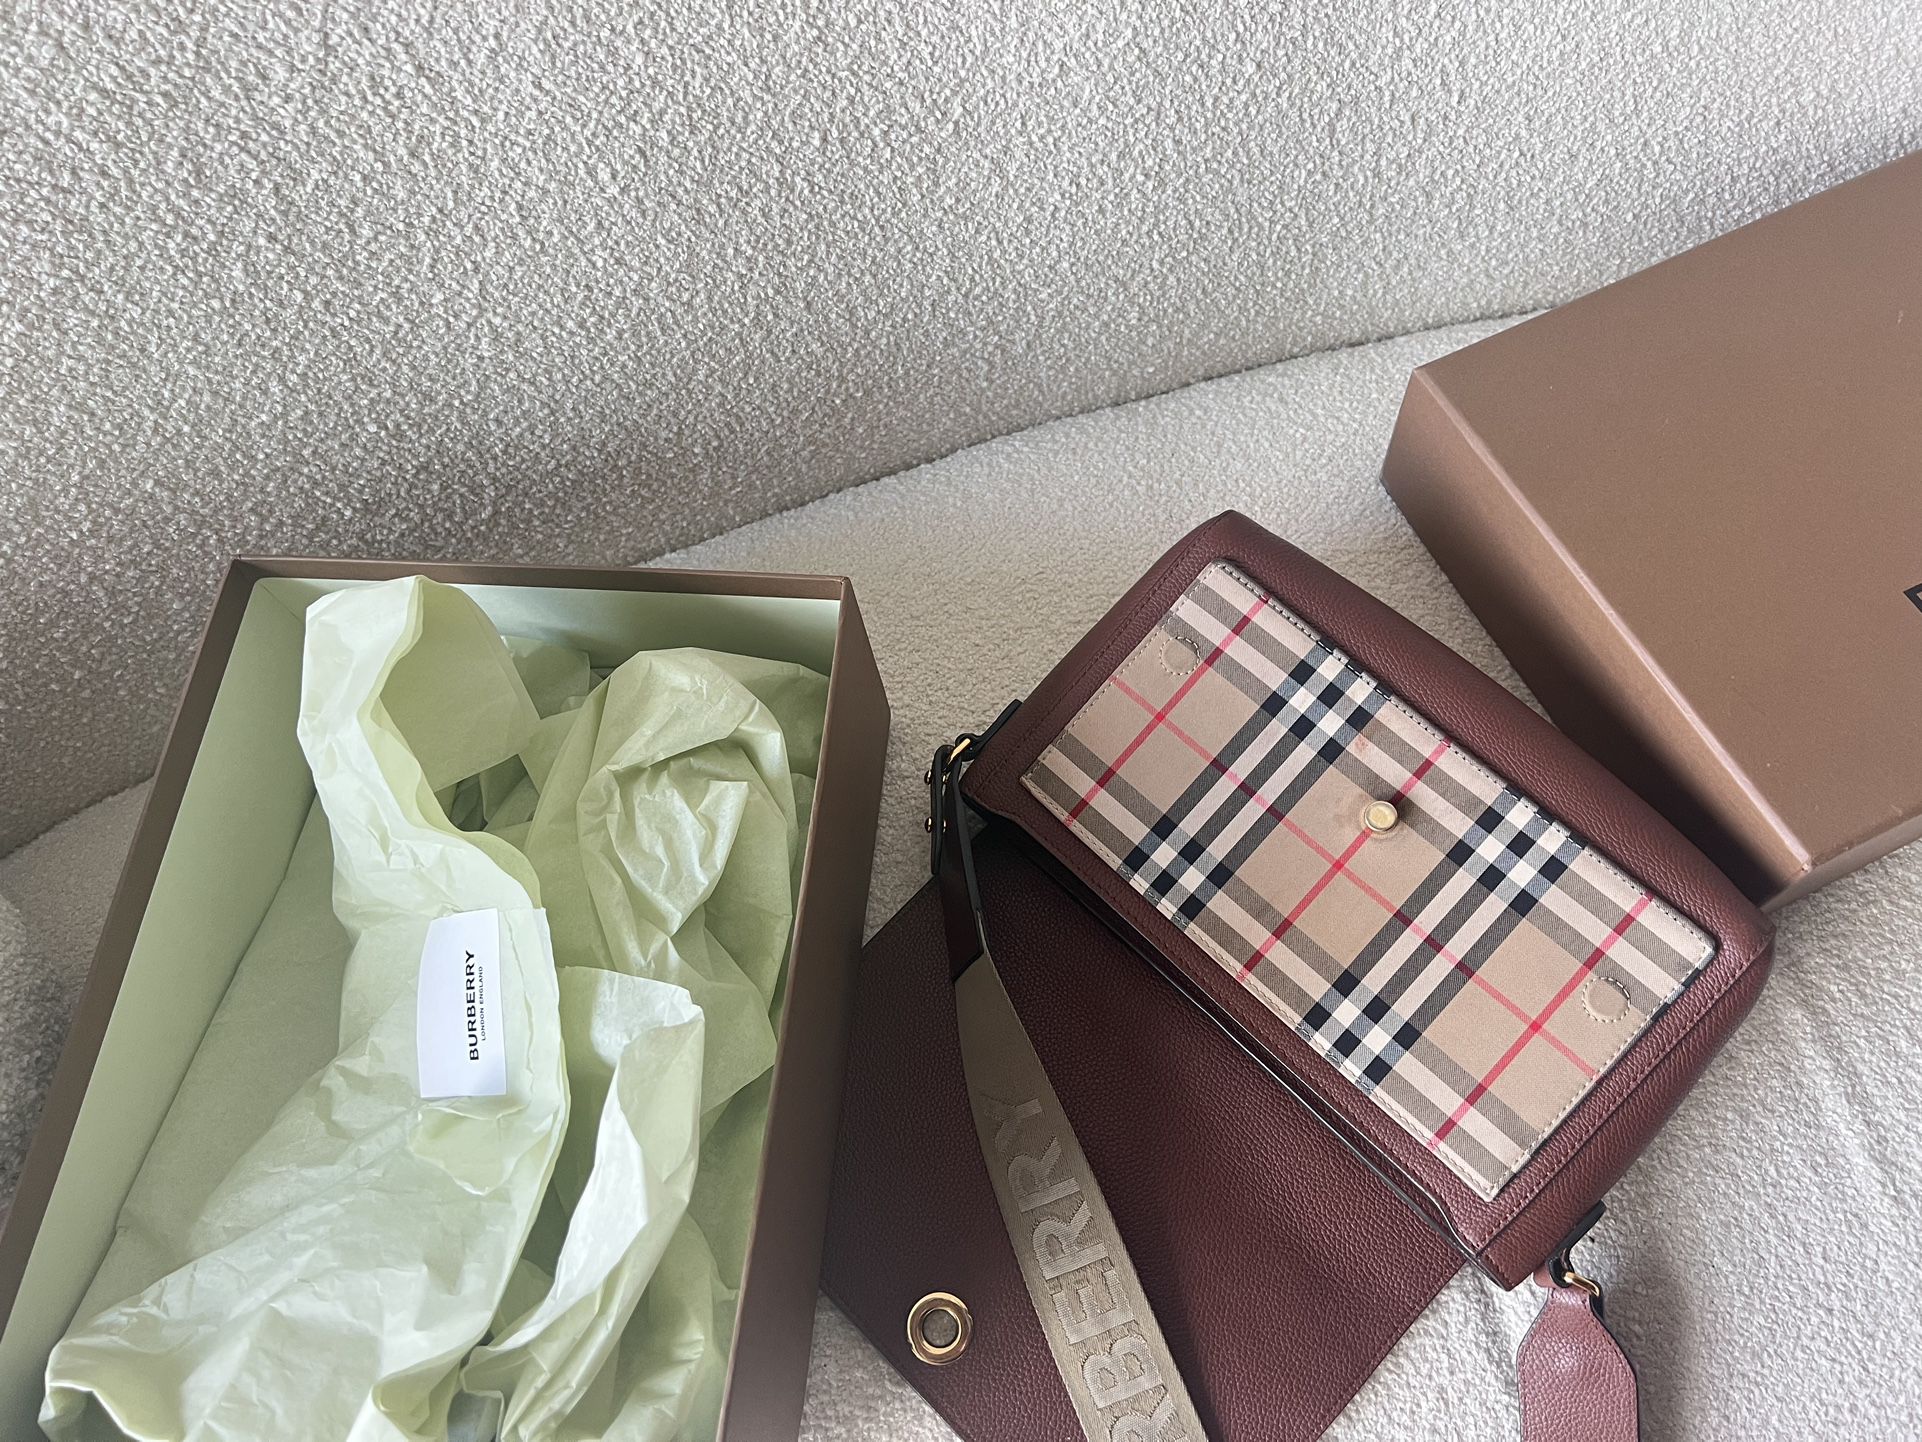 Burberry Purse for Sale in Houston, TX - OfferUp